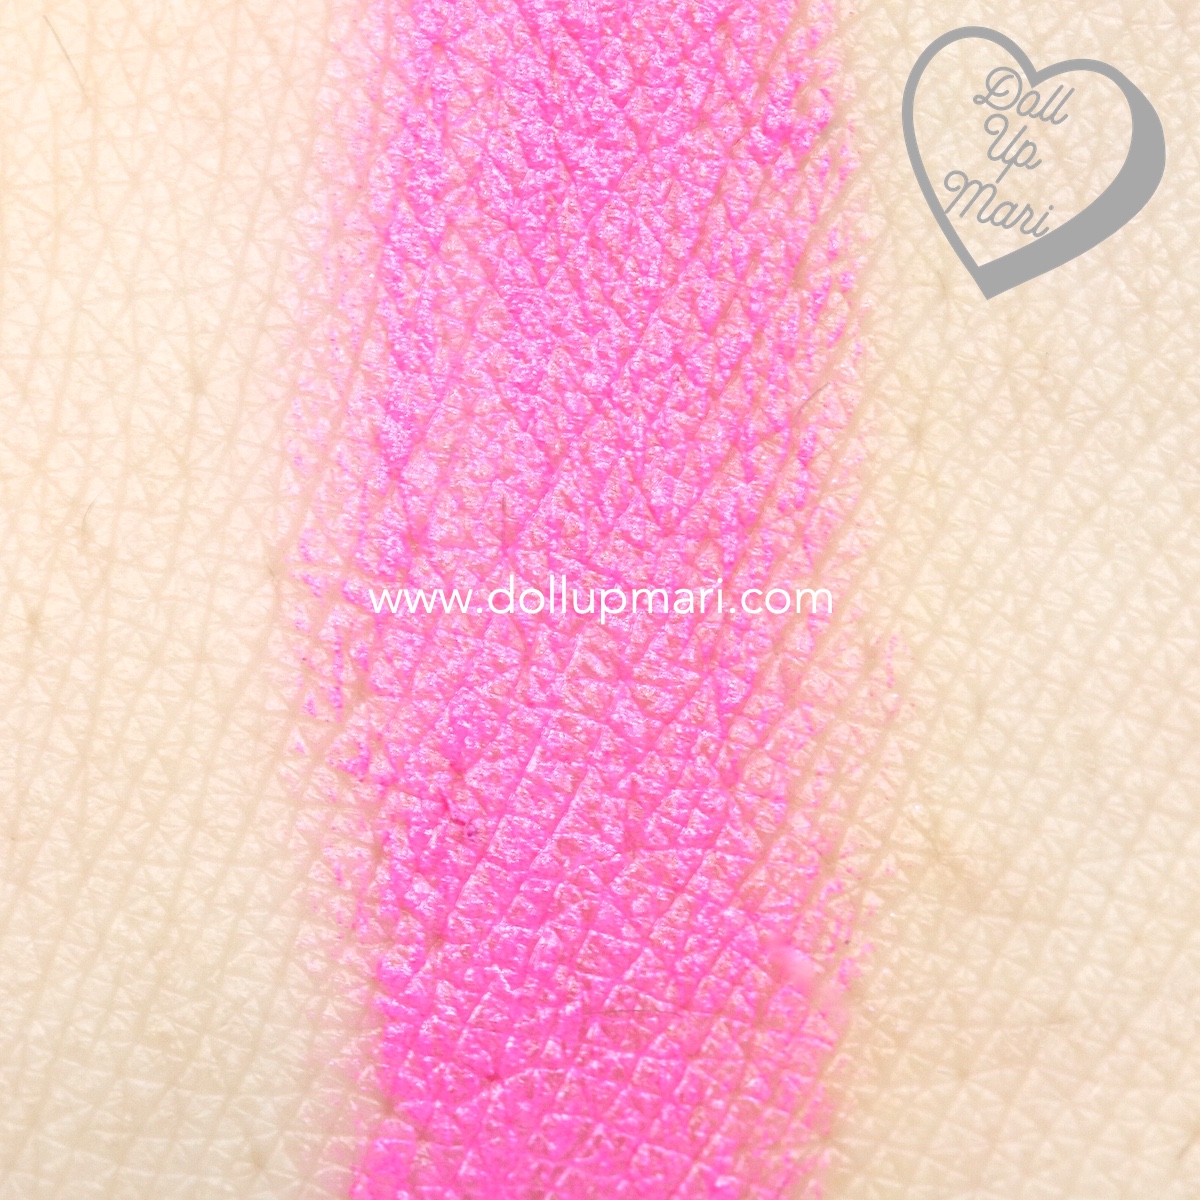 Swatch of Electric Pink shade of AVON Perfectly Matte Lipstick